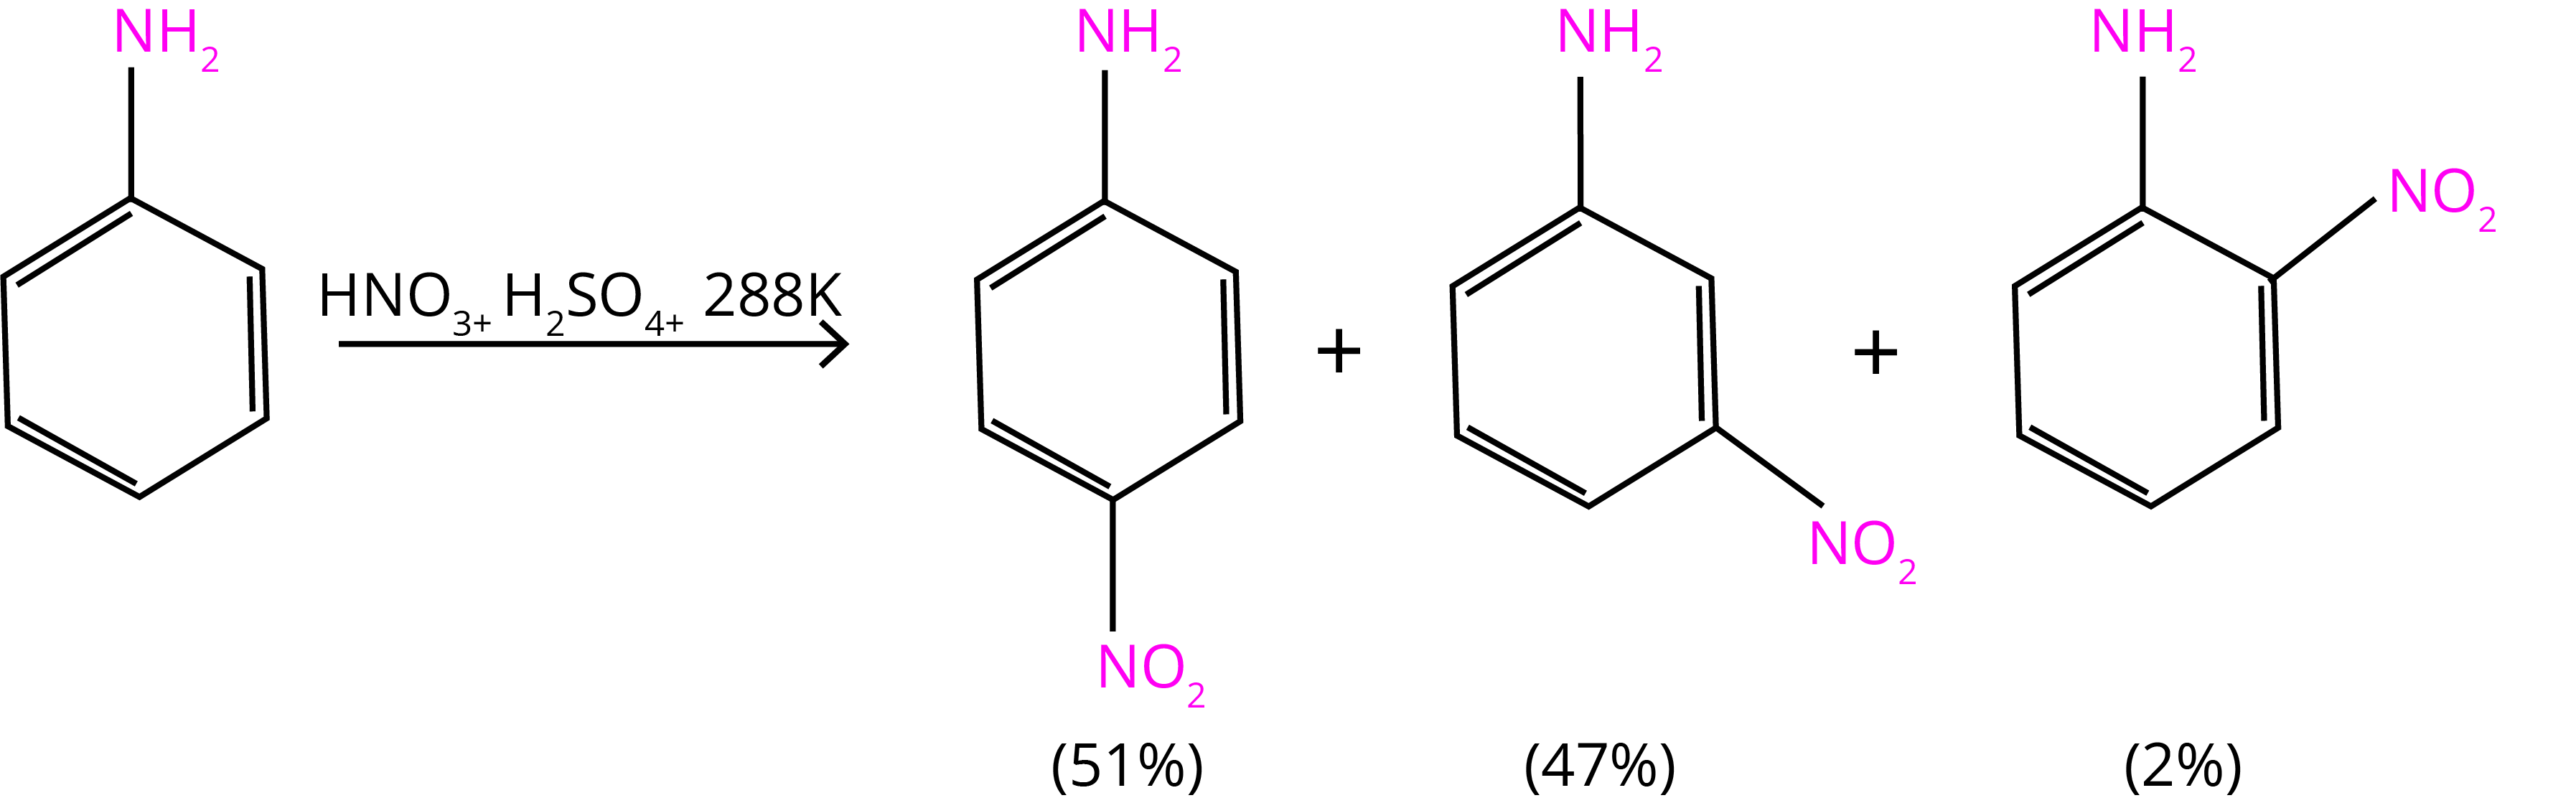 Electrophilic Substitution Reaction- Nitration